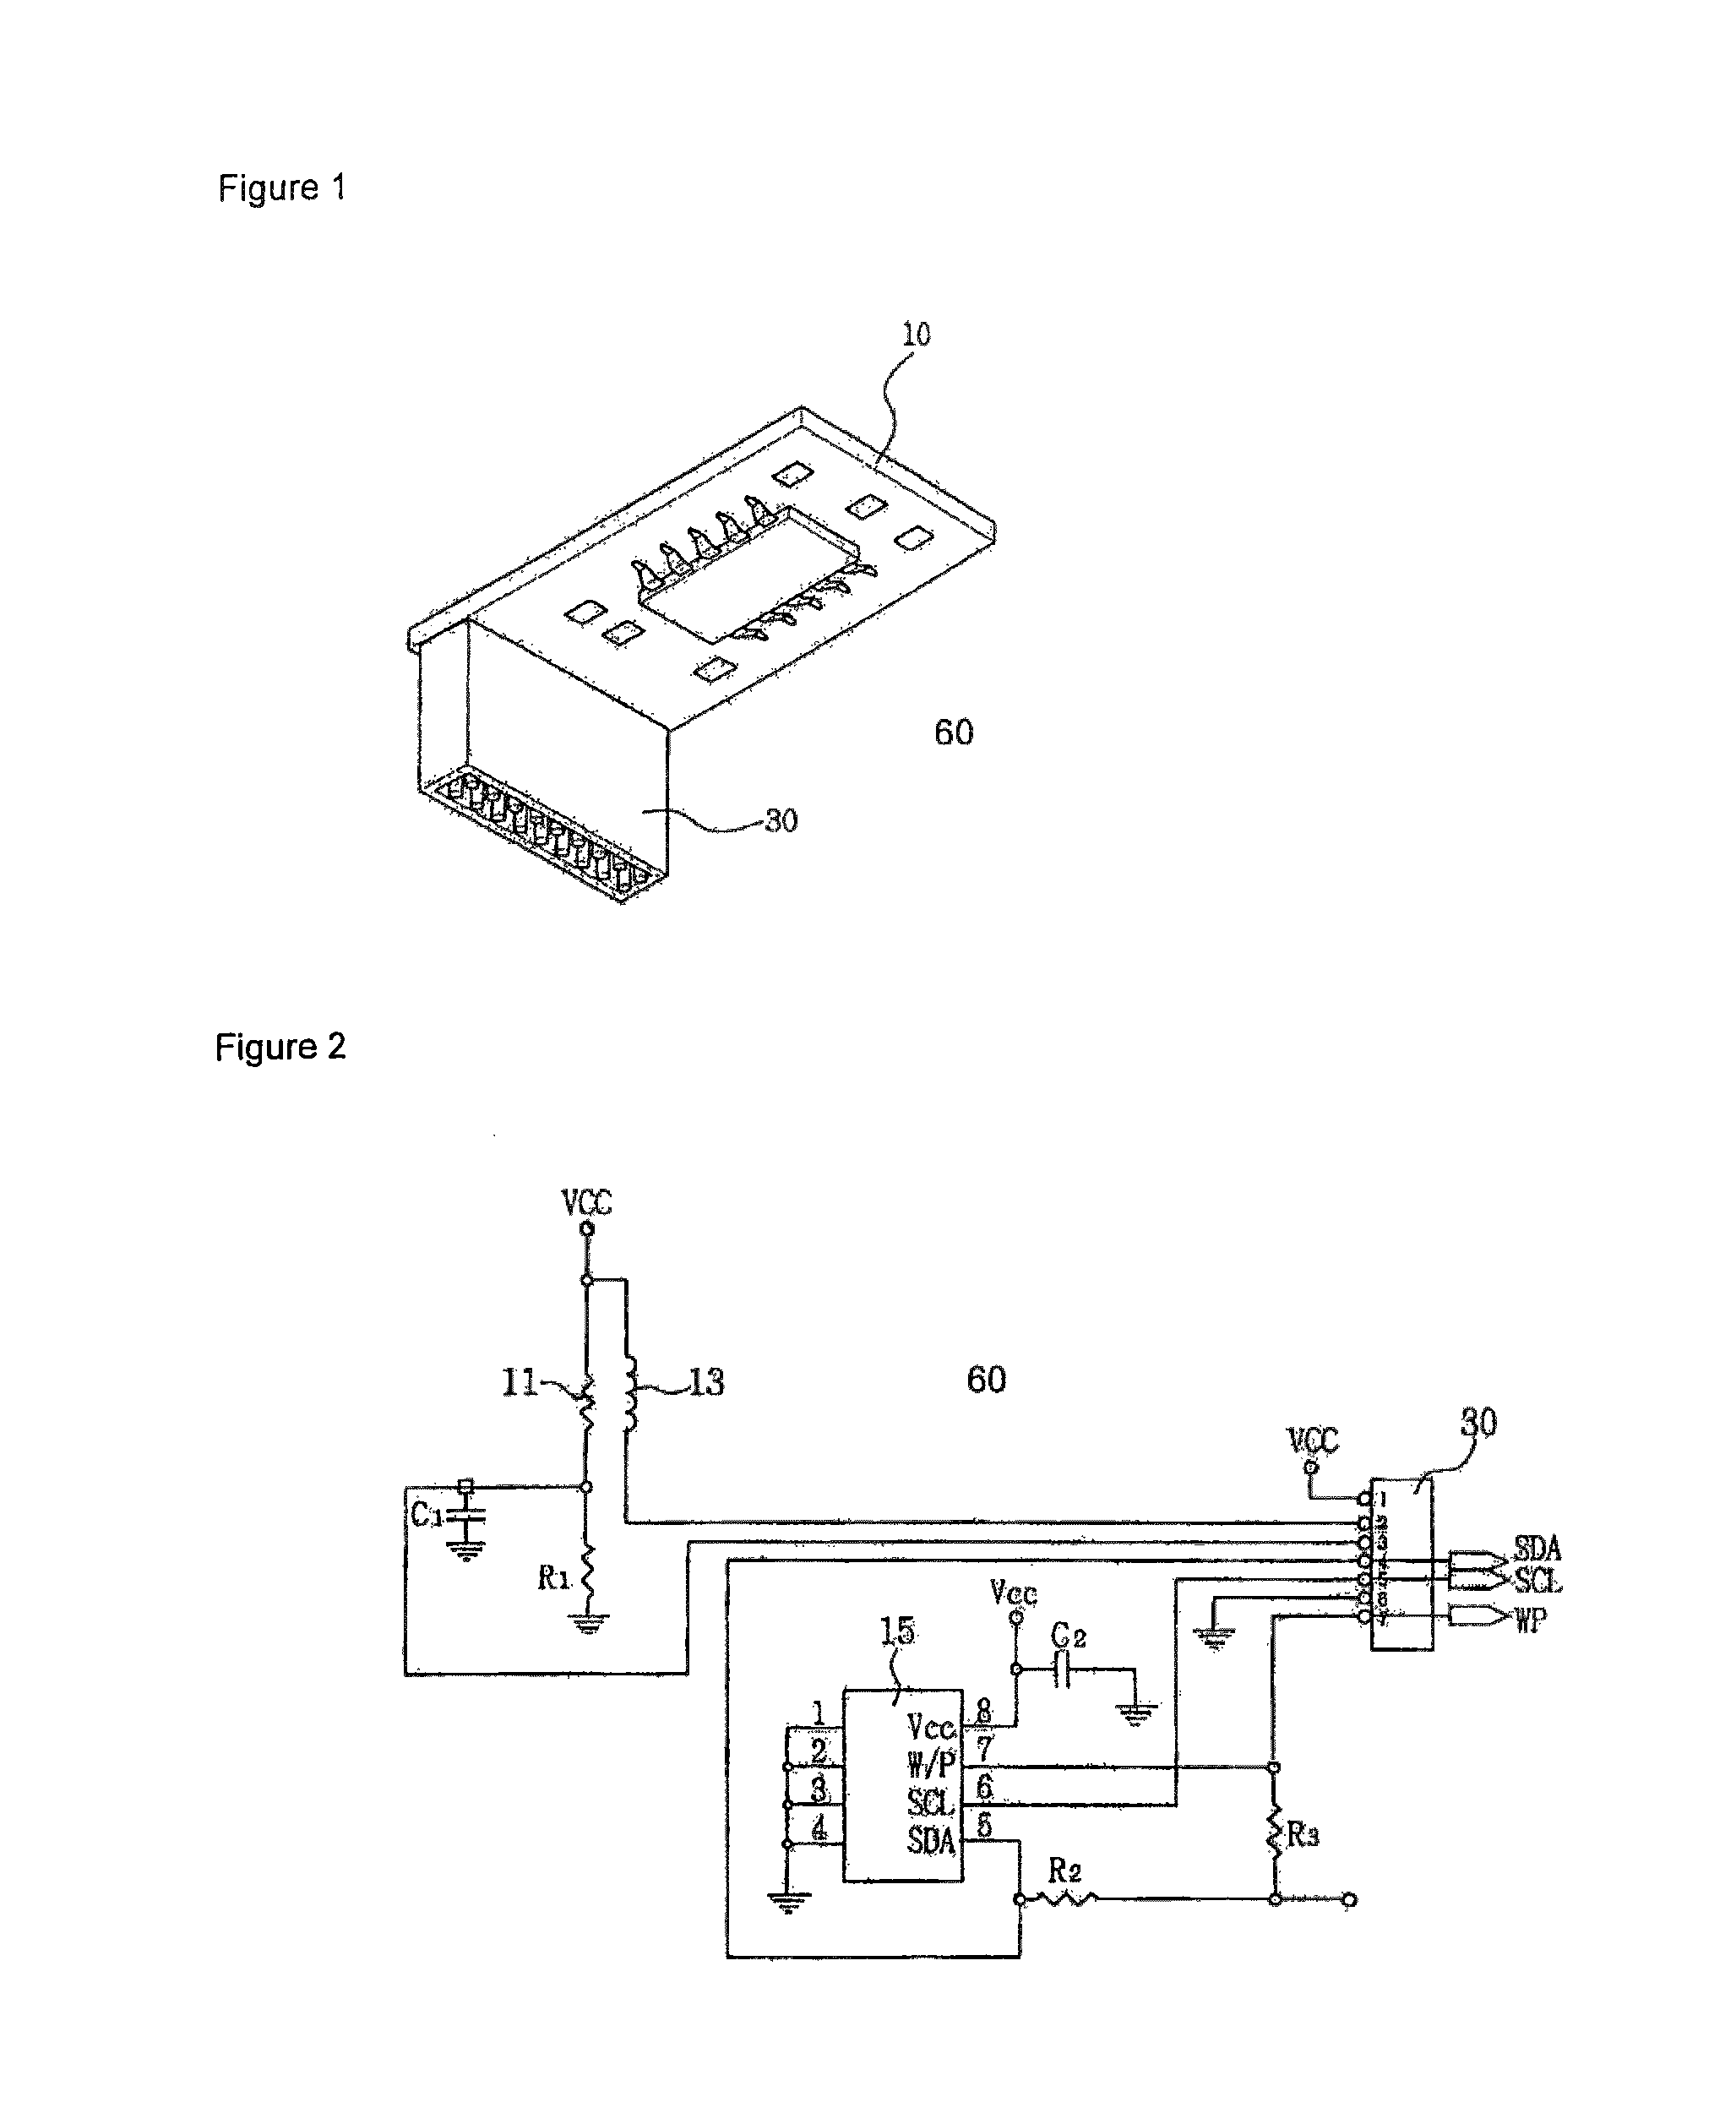 Pre-calibrated replaceable sensor module for a breath alcohol testing device